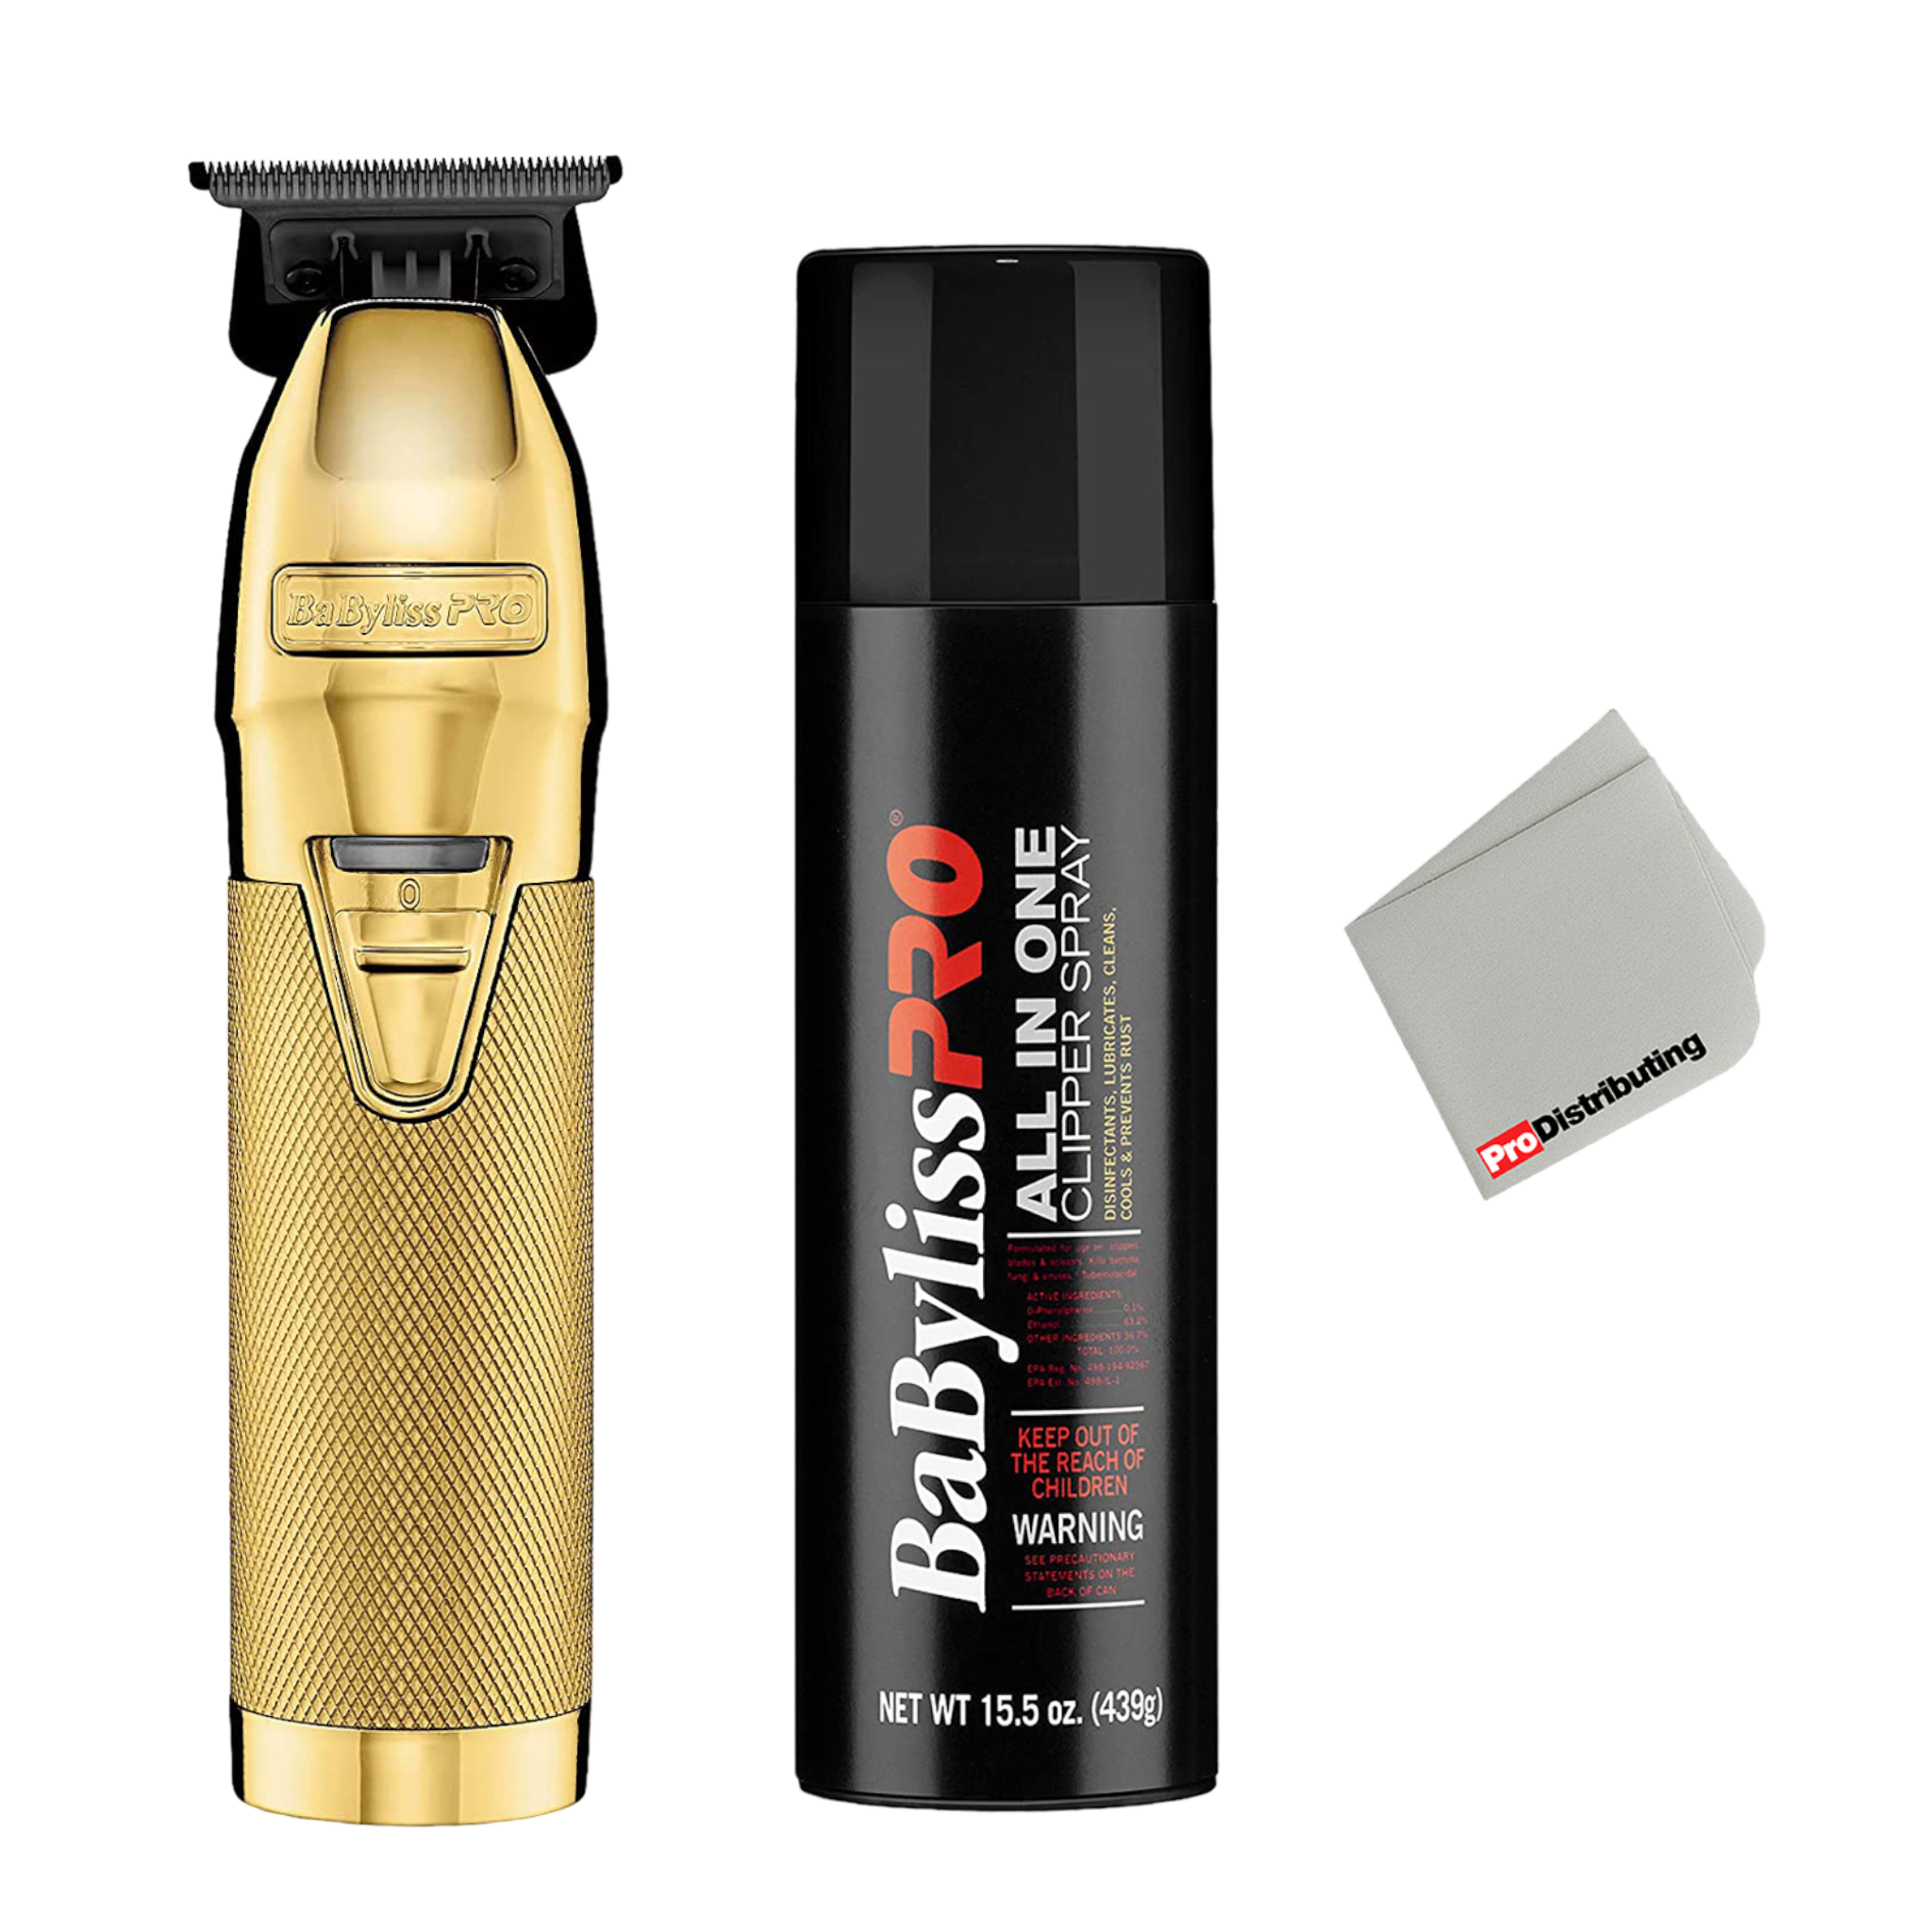 BaBylissPRO Gold FX Exposed Black Cordless Hair Trimmer Bundle with Barberology Cleaning Spray and Cleaning Cloth - Pro-Distributing